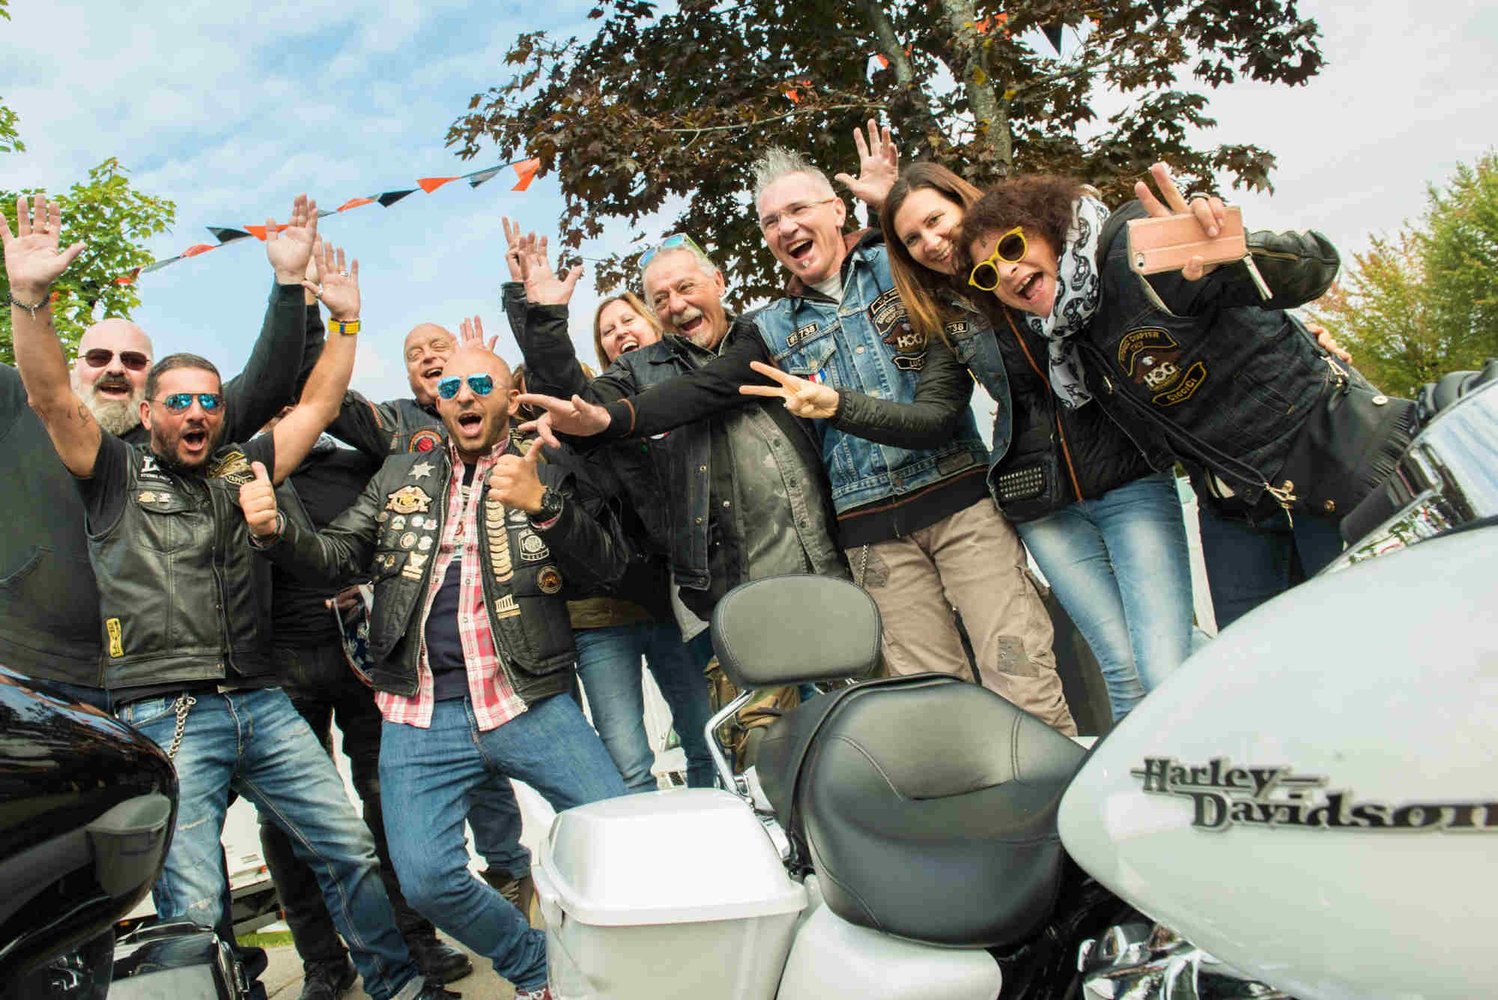 A group of motorcyclists